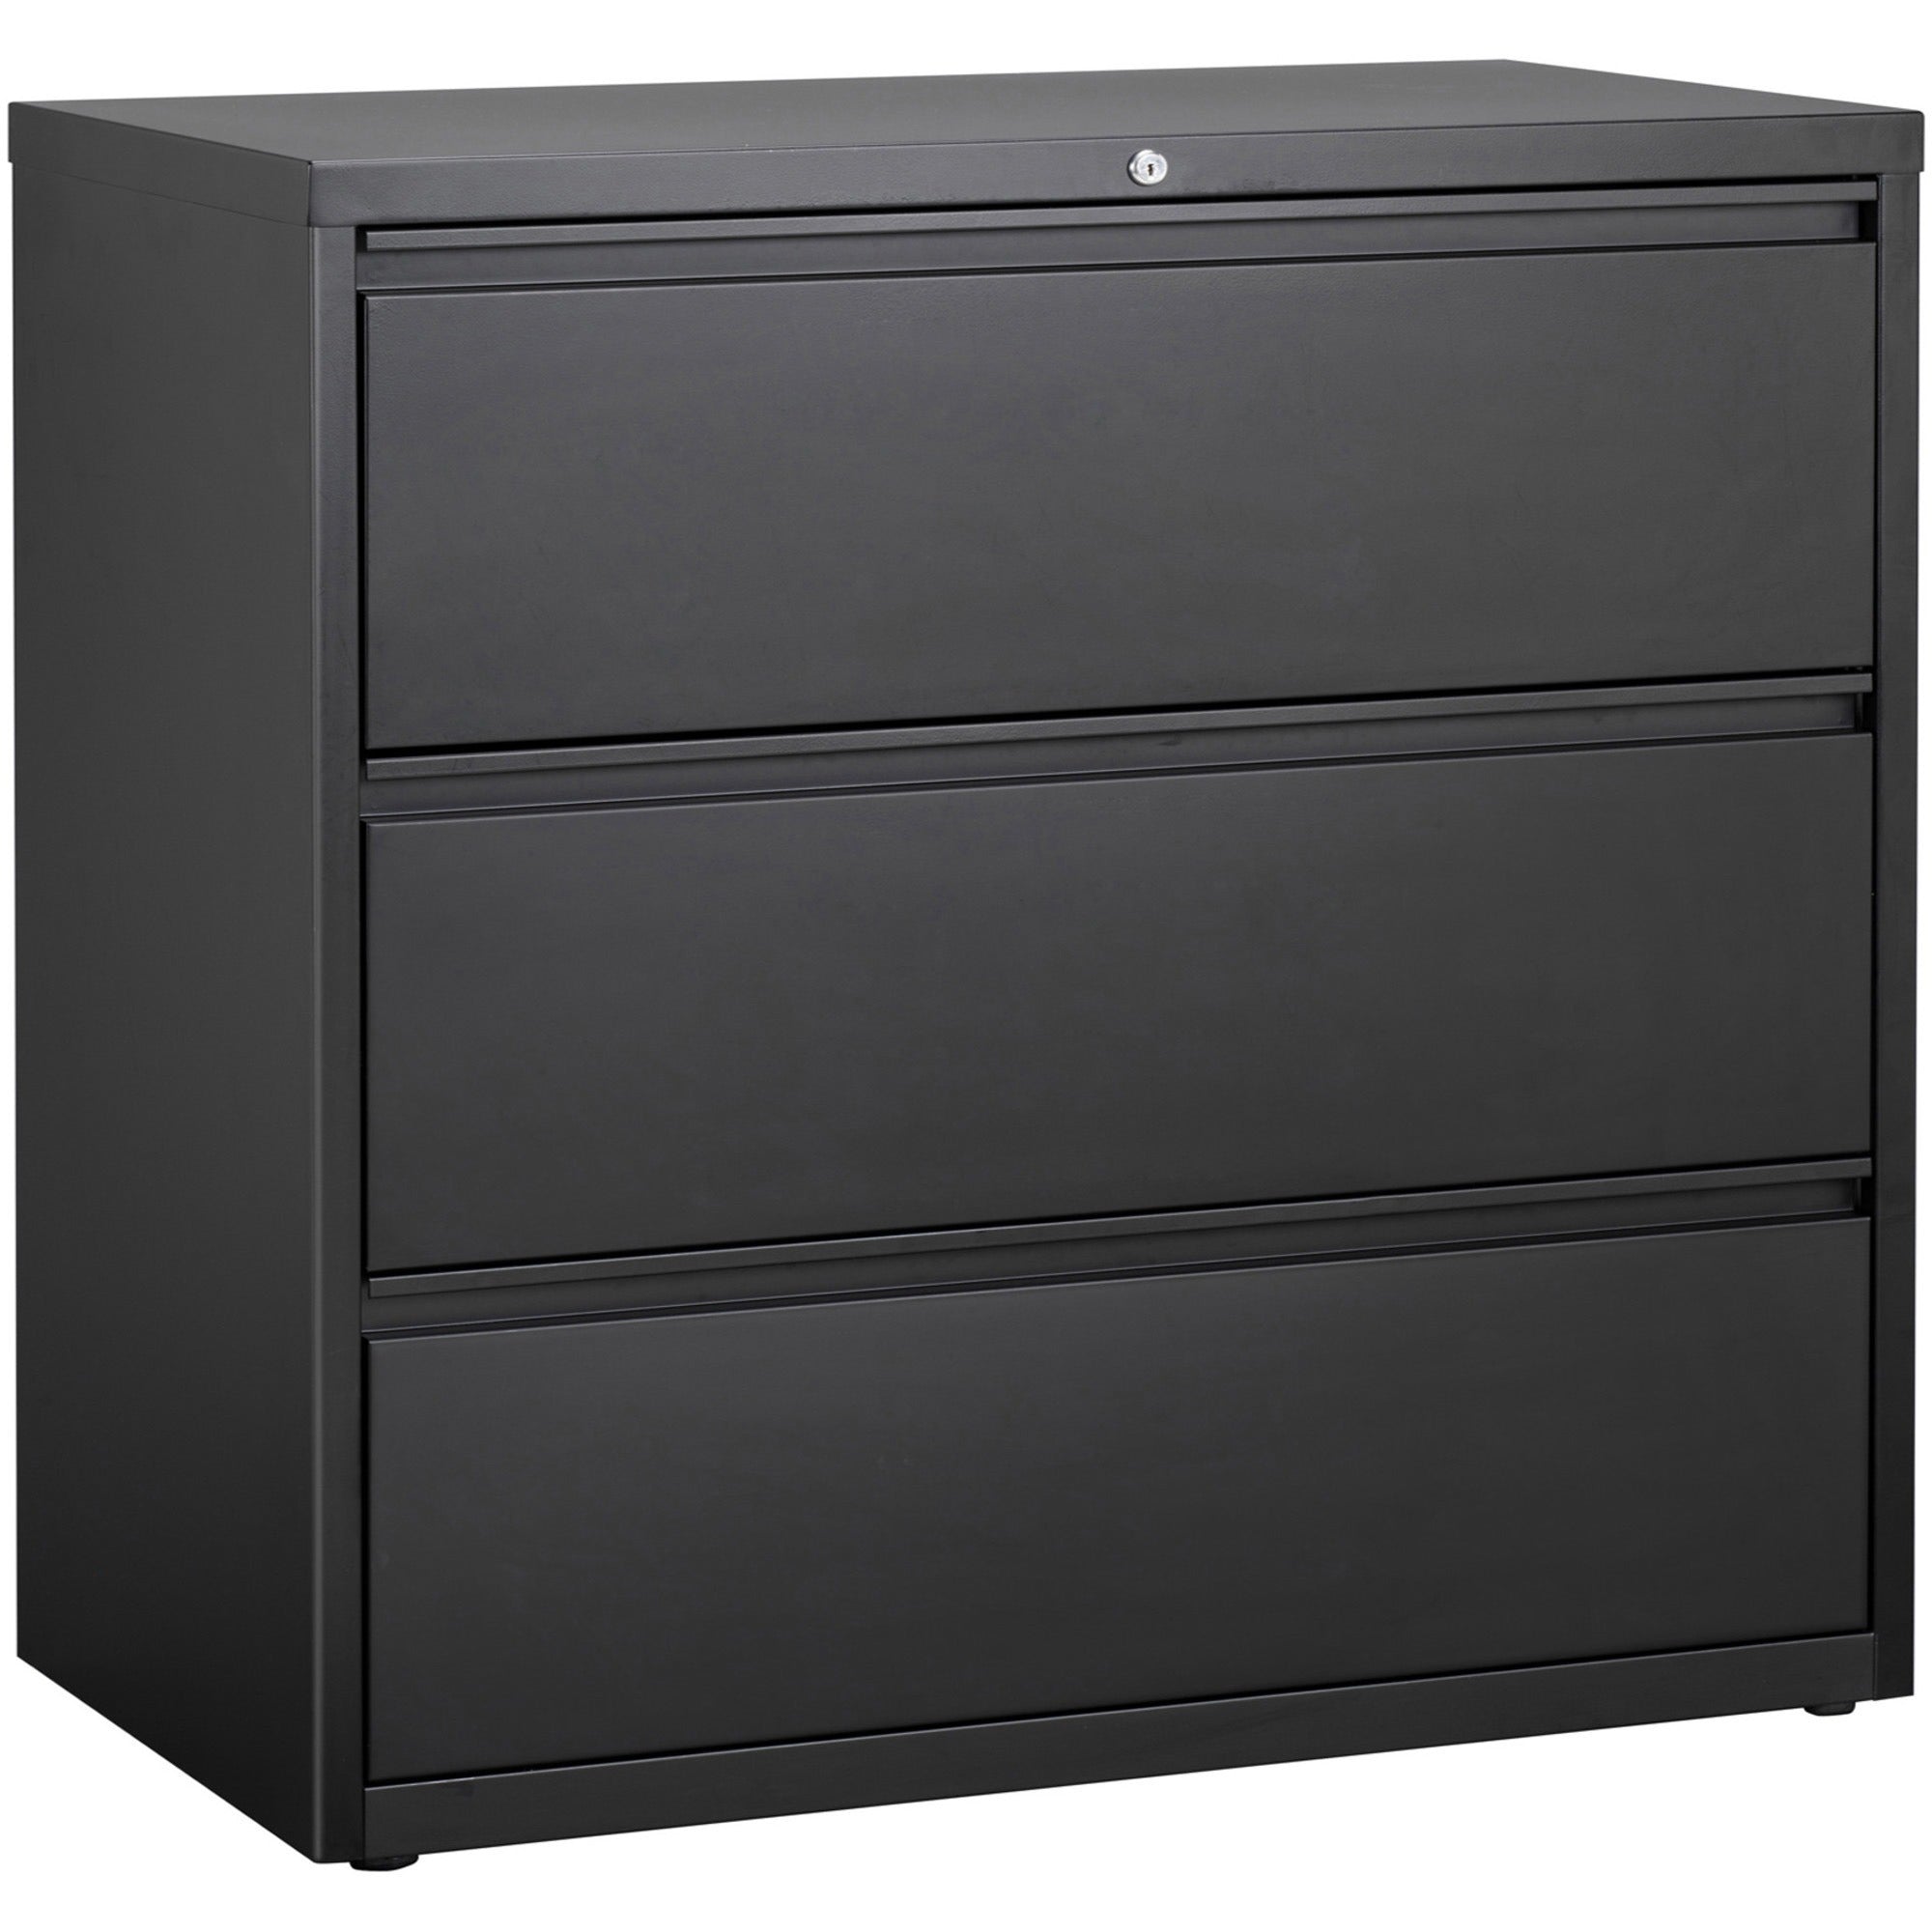 Lorell Fortress Series Lateral File - 42" x 18.6" x 40.3" - 3 x Drawer(s) for File - Letter, Legal, A4 - Lateral - Locking Drawer, Magnetic Label Holder, Ball-bearing Suspension, Leveling Glide - Black - Steel - Recycled - 